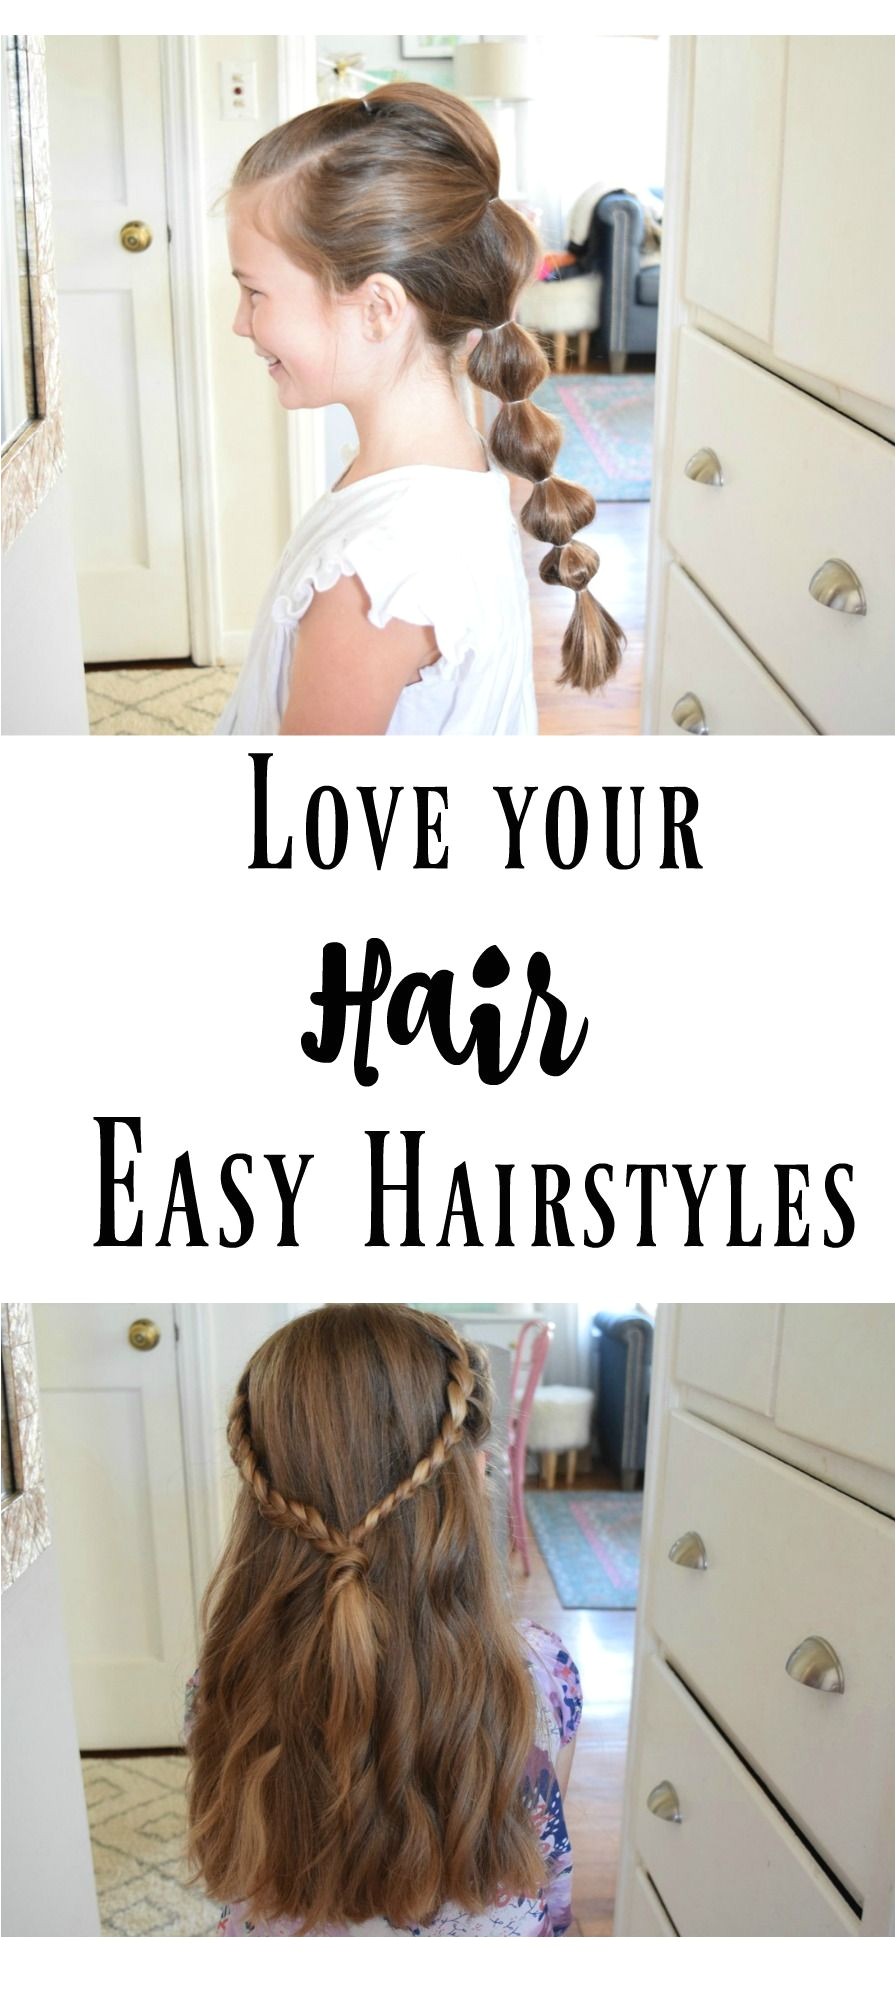 Hairstyles Easy for Little Girls I have shared here before that my oldest left our home with tears over her hair and what she was wearing